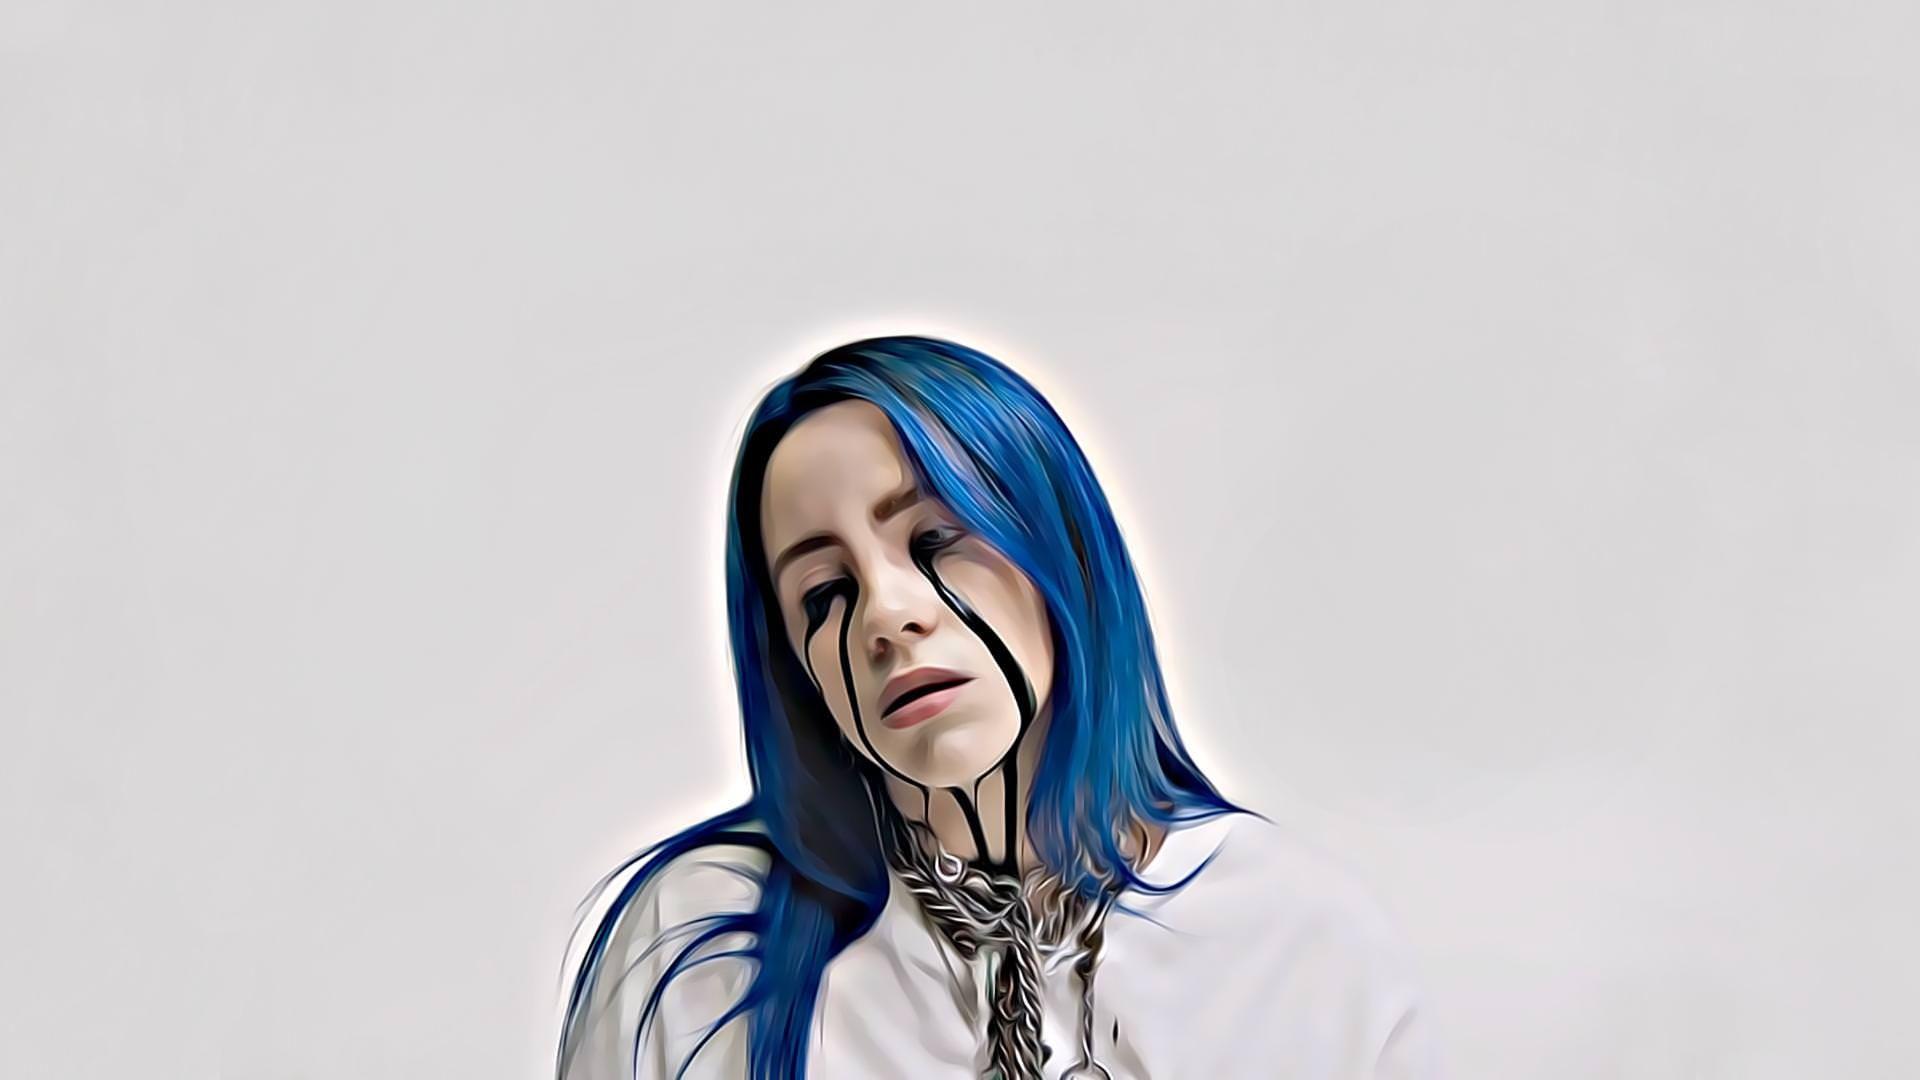 I made this from Billie Eilish's latest music video. in 2019